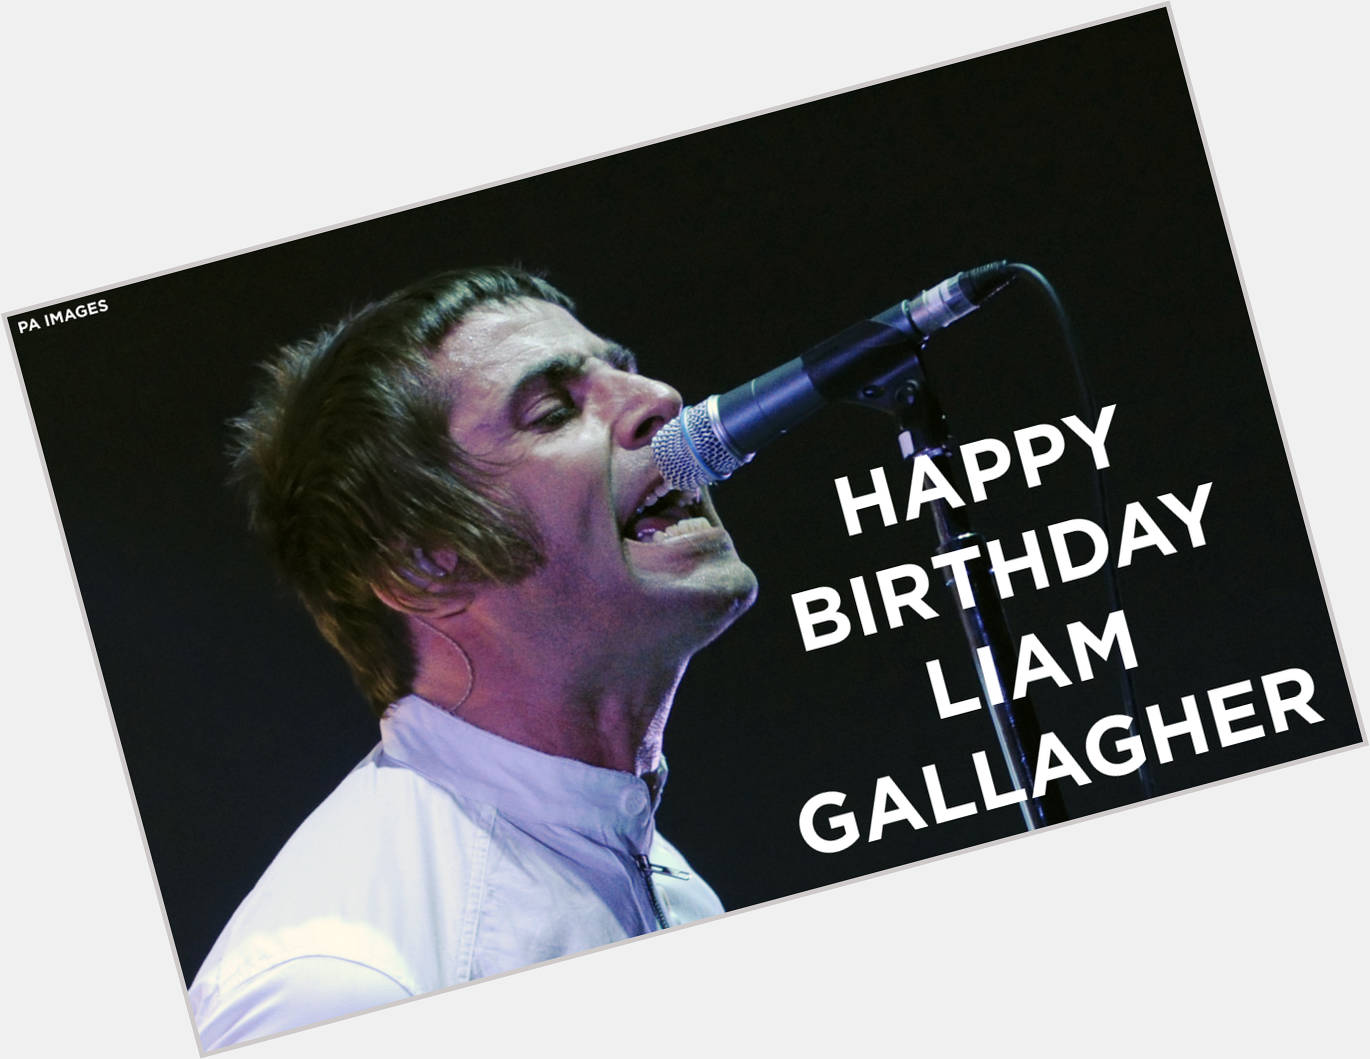 Happy Birthday Liam Gallagher!
What is you\re favourite 90s Oasis song sung by the frontman? 
We will play 3 at 6pm. 